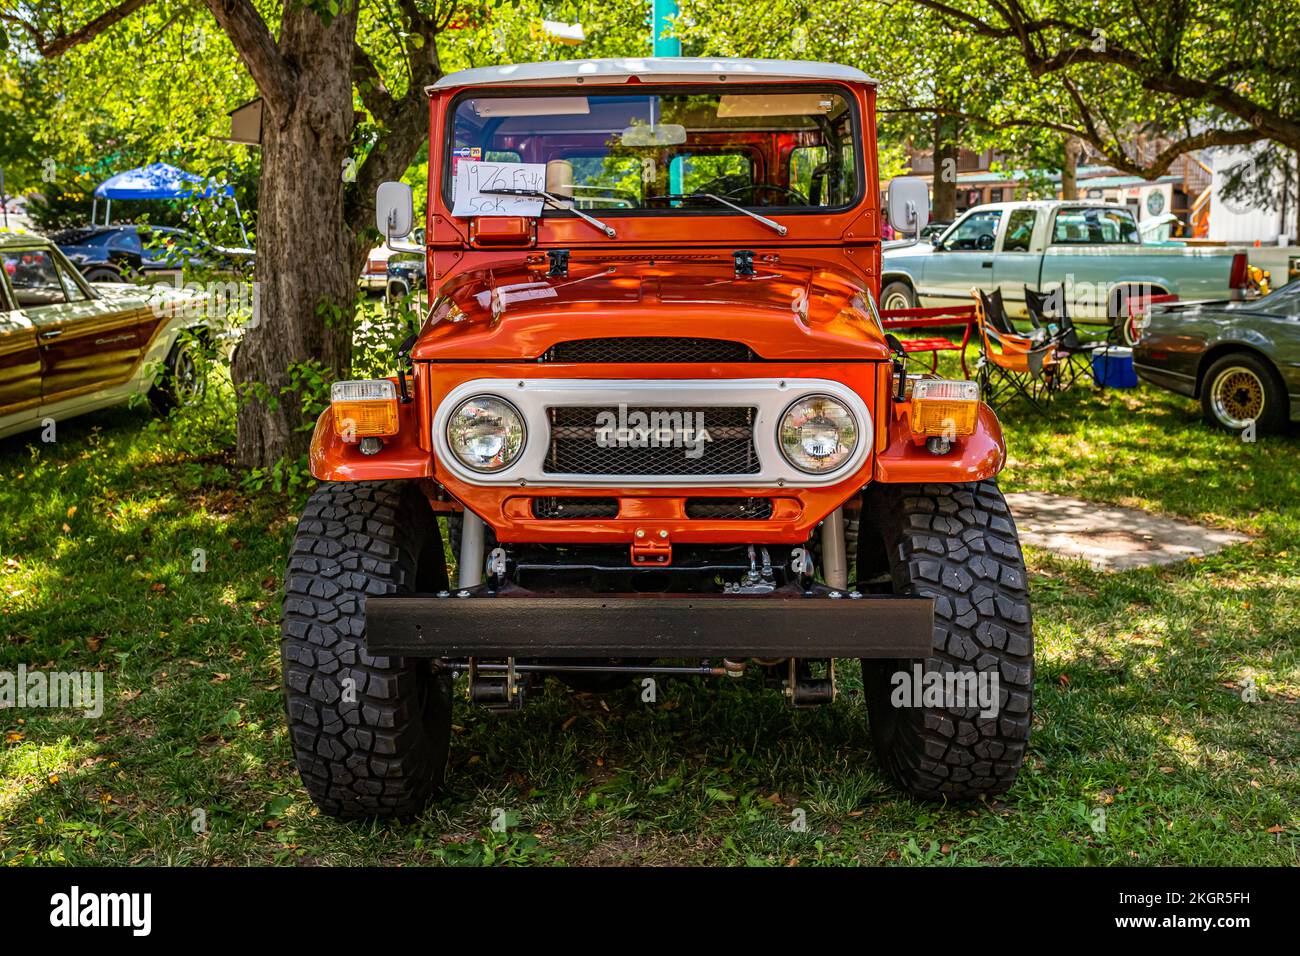 Des Moines, IA - July 03, 2022: High perspective front view of a 1976 Toyota Land Cruiser FJ40 at a local car show. Stock Photo